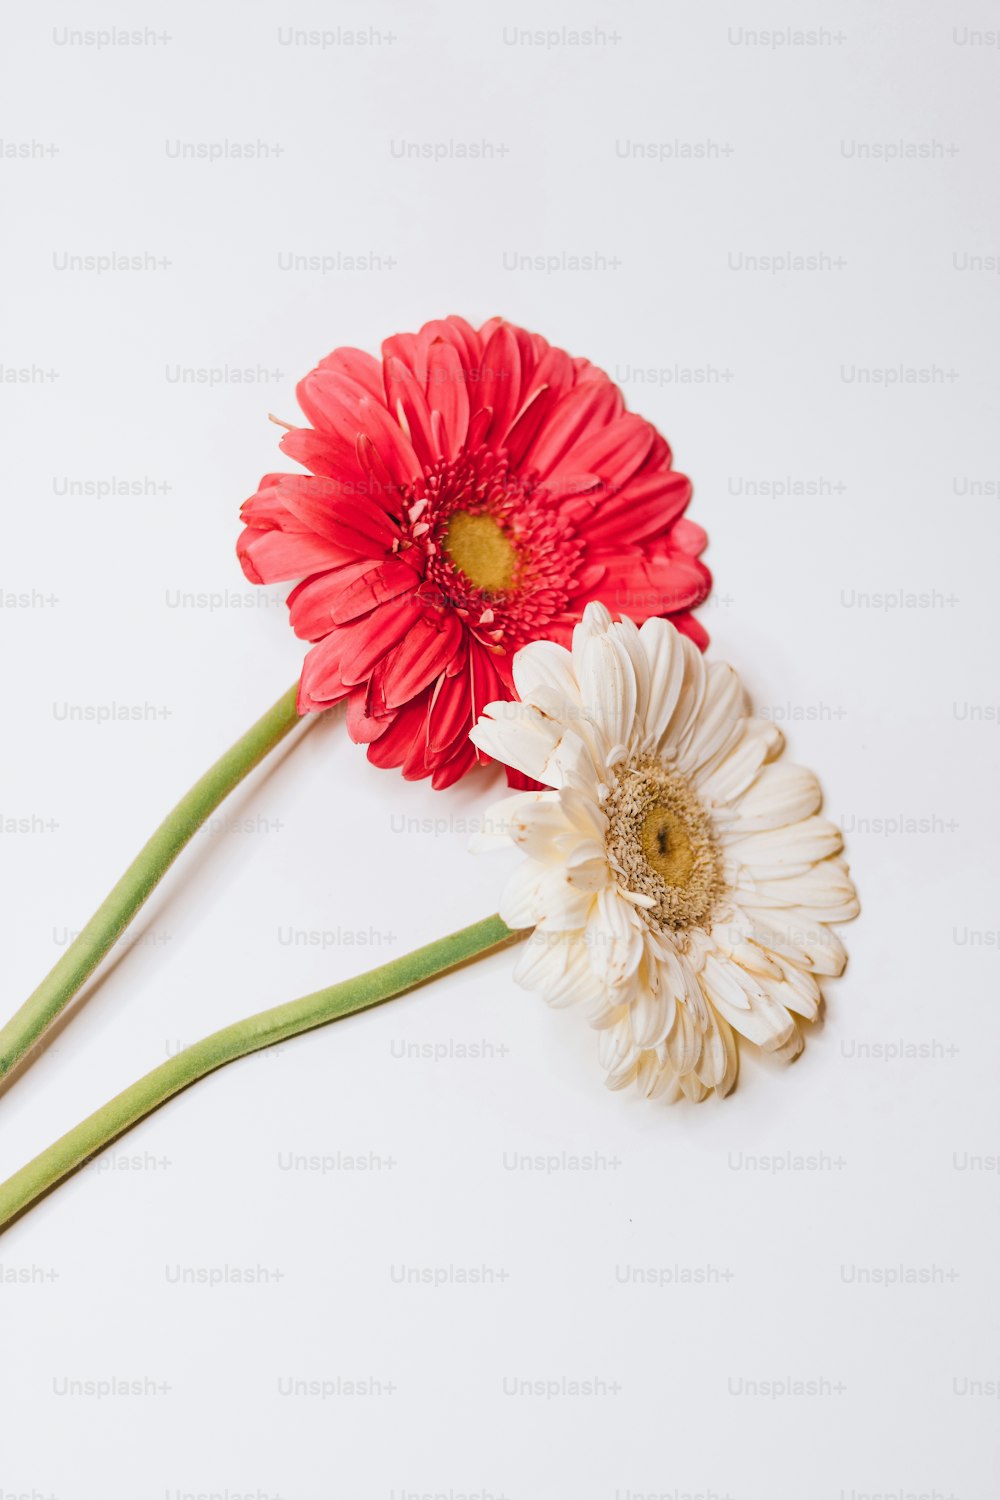 two red and white flowers on a white surface